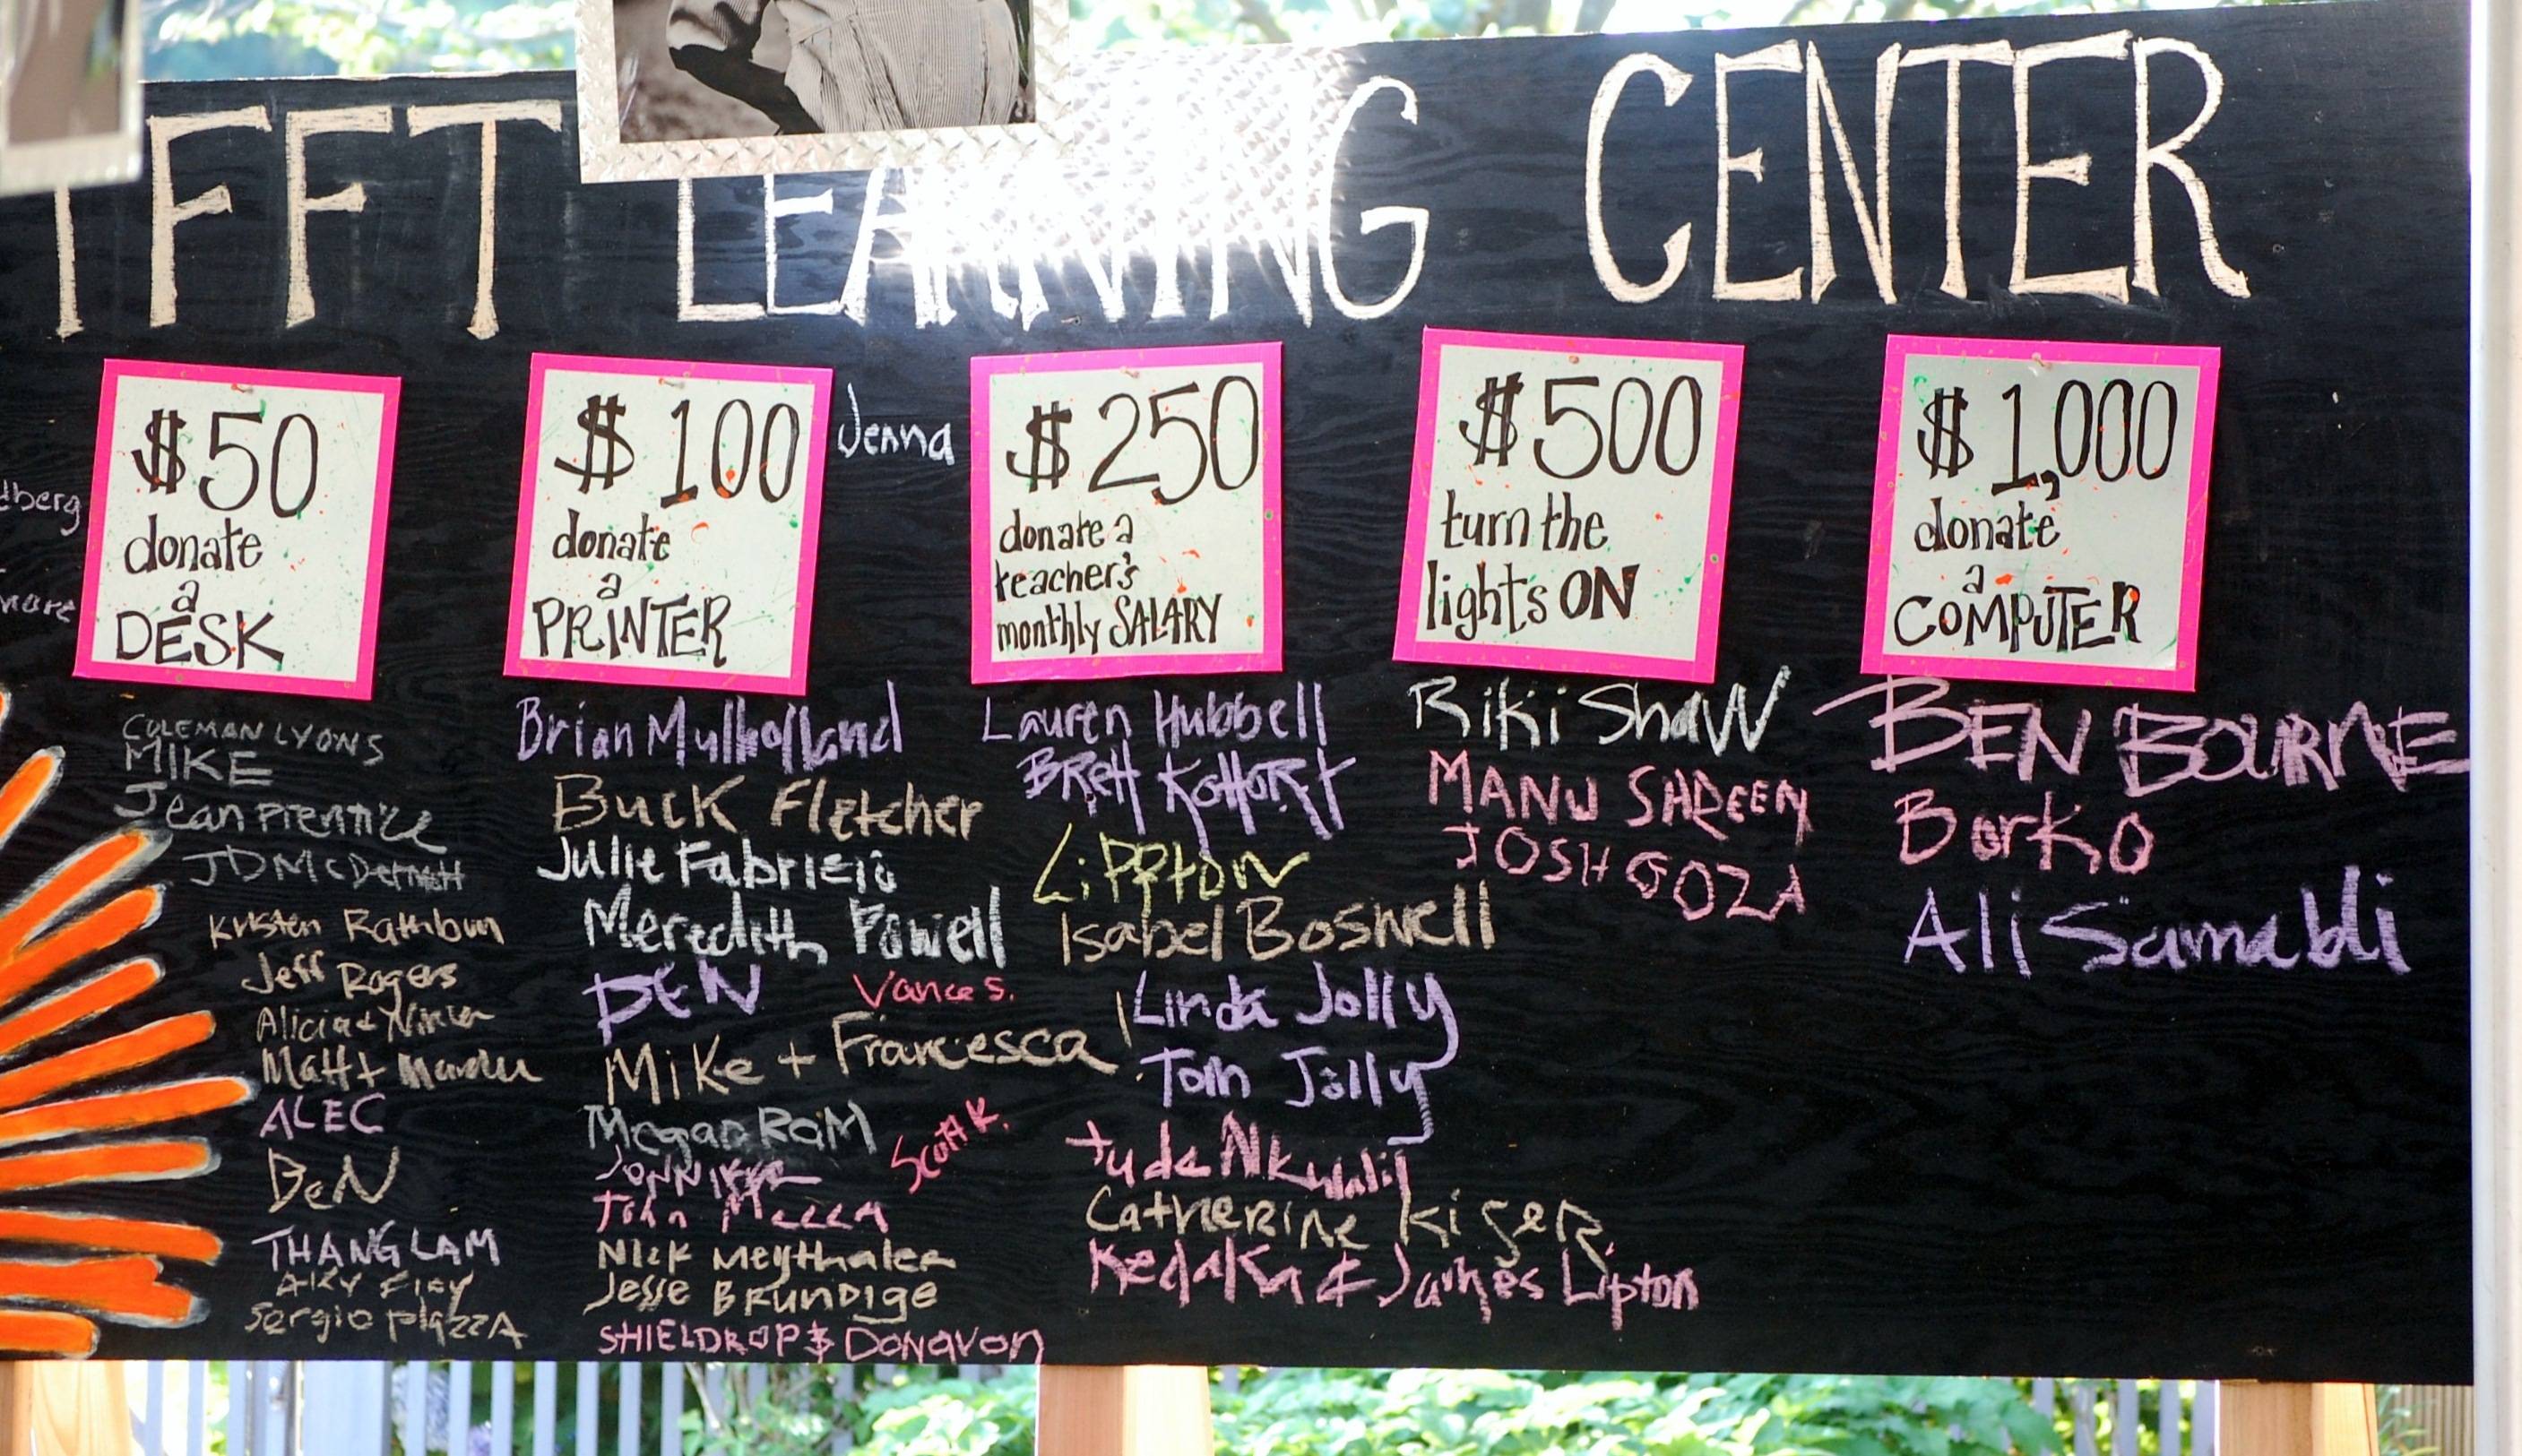 Donation board for the Learning Center